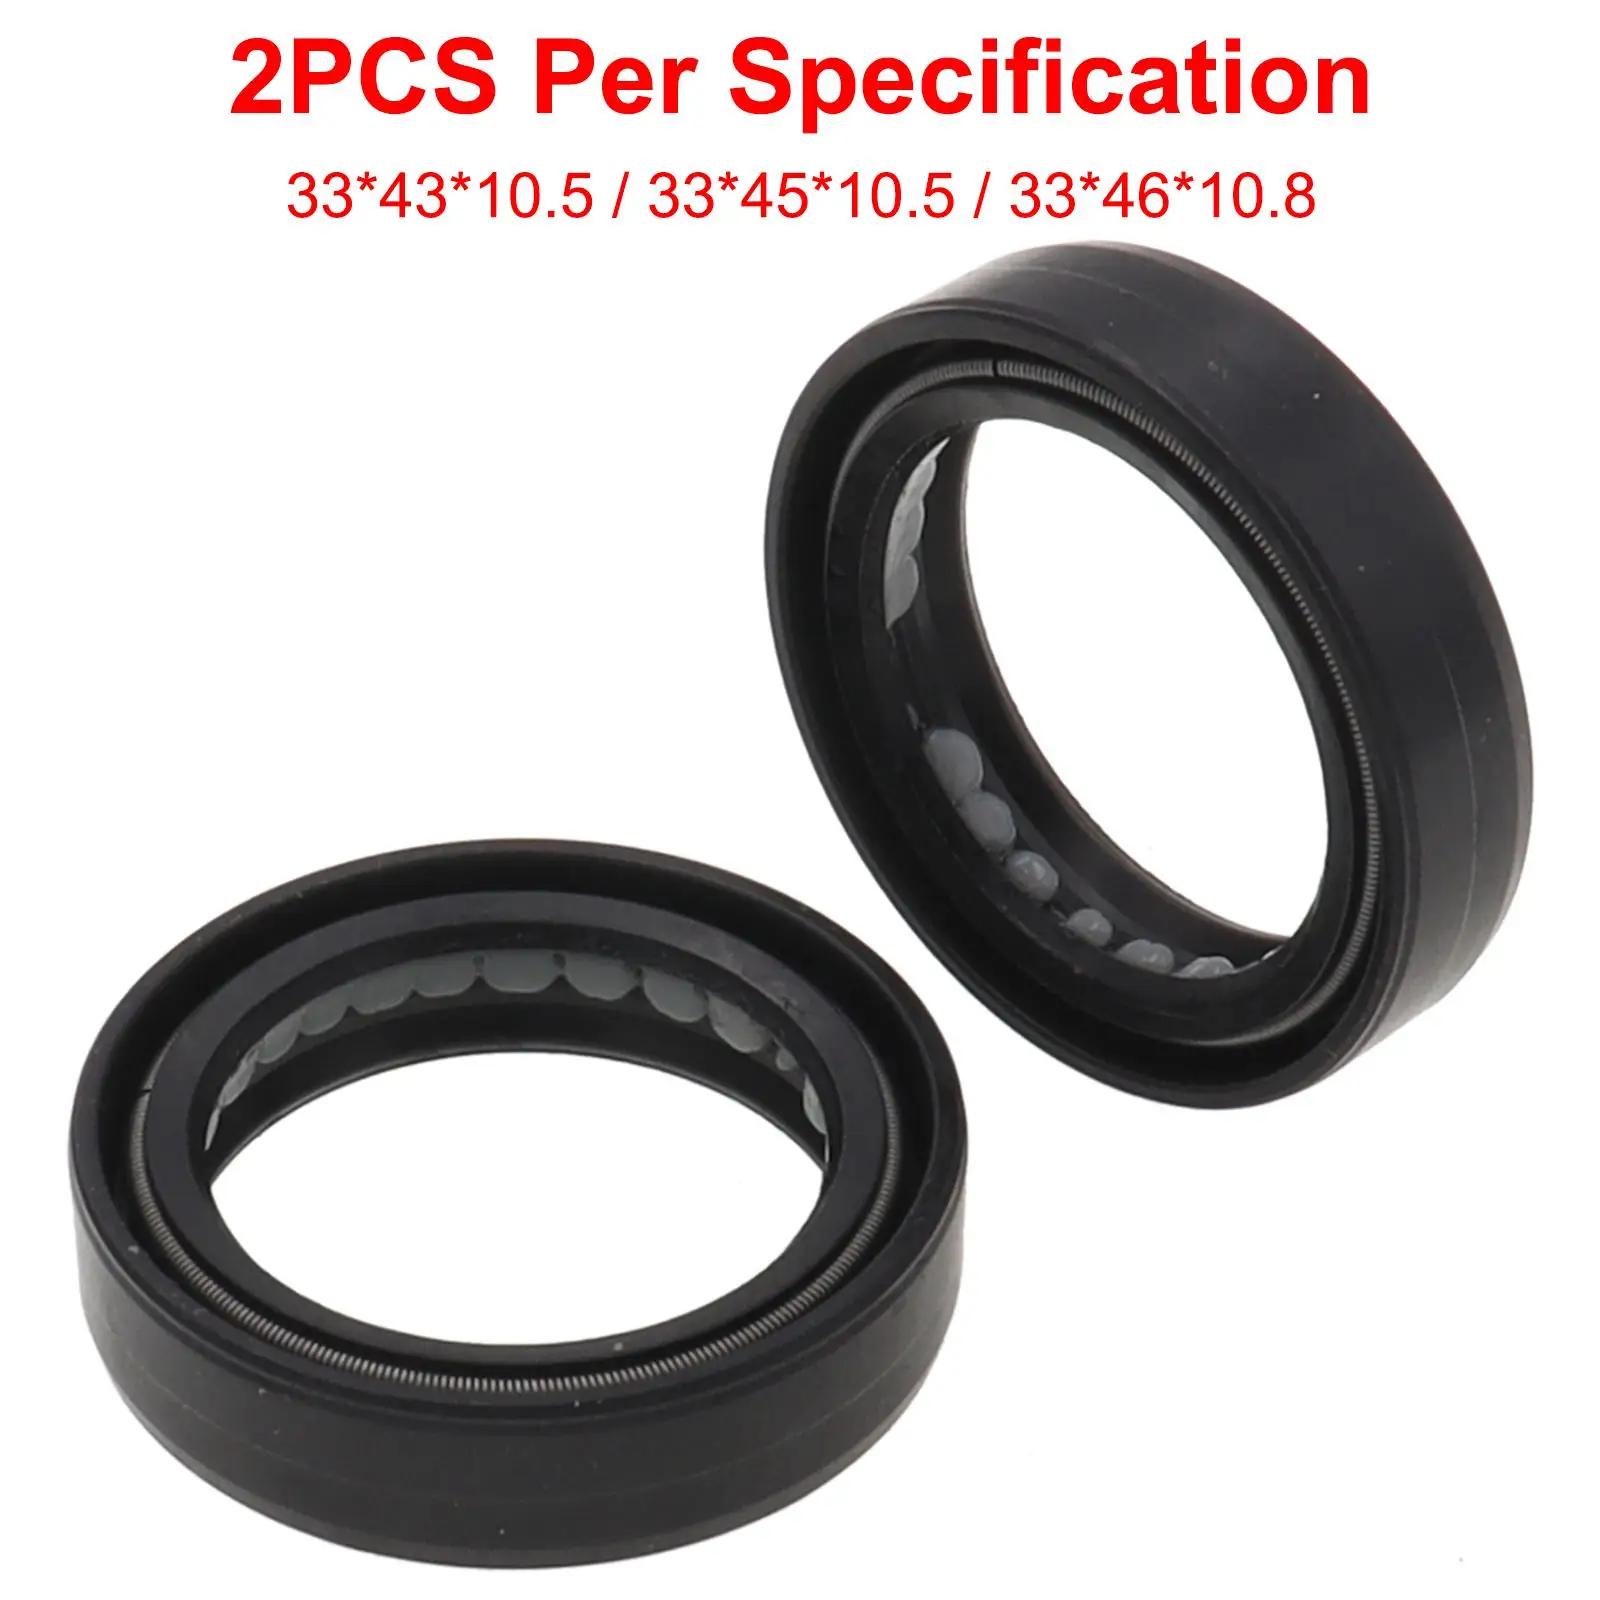 Motorcycle Front Fork Damper Oil Seal High Performance Wear Resistant Durable